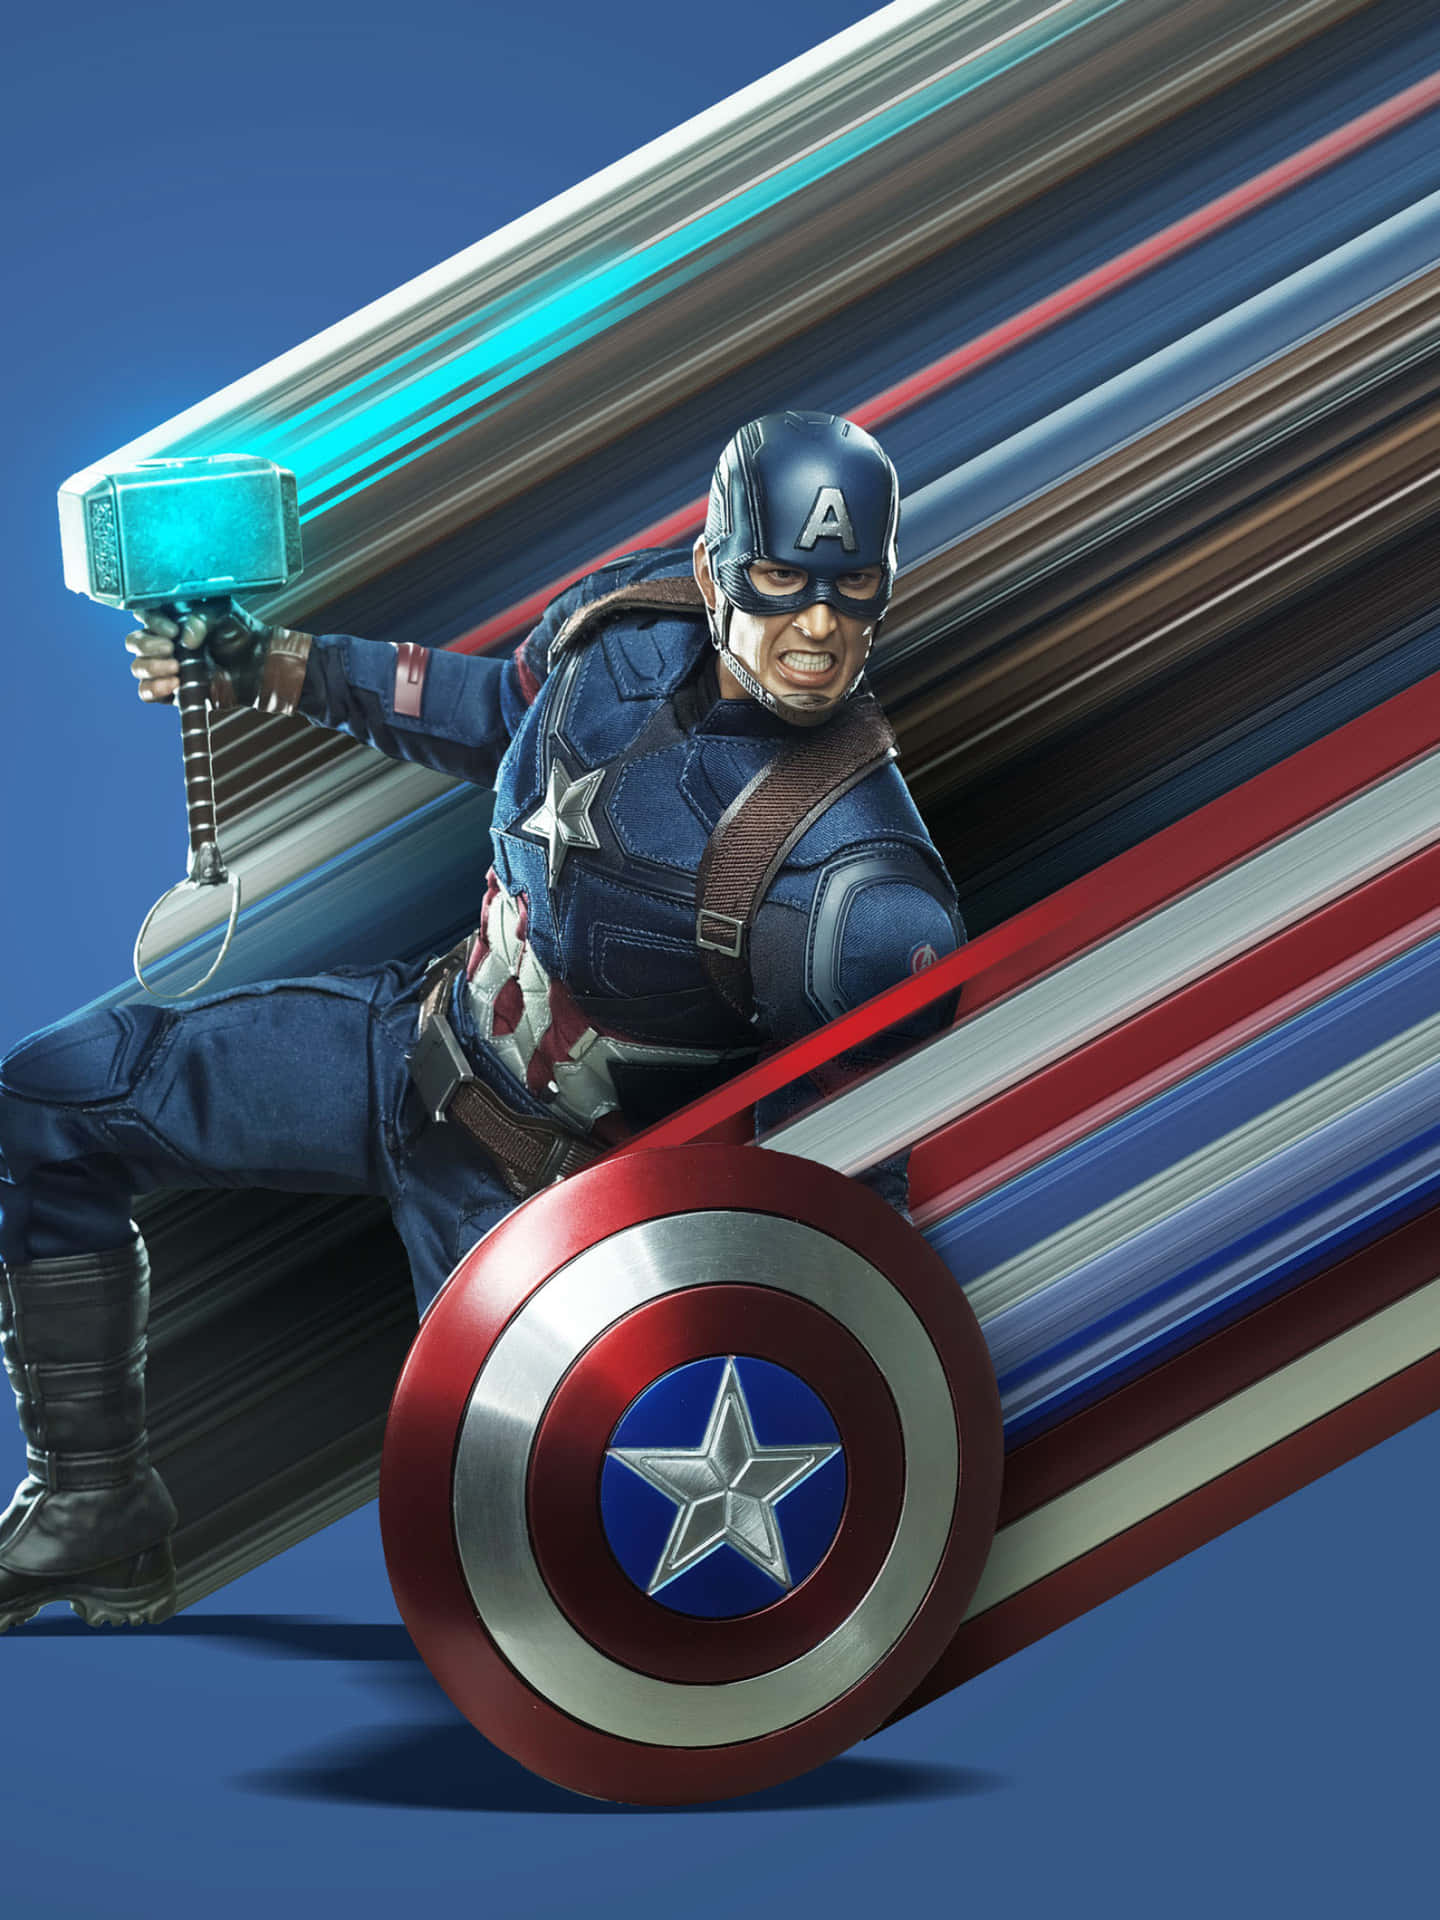 "The Last of the Captain; Captain America's Journey Comes to an End" Wallpaper